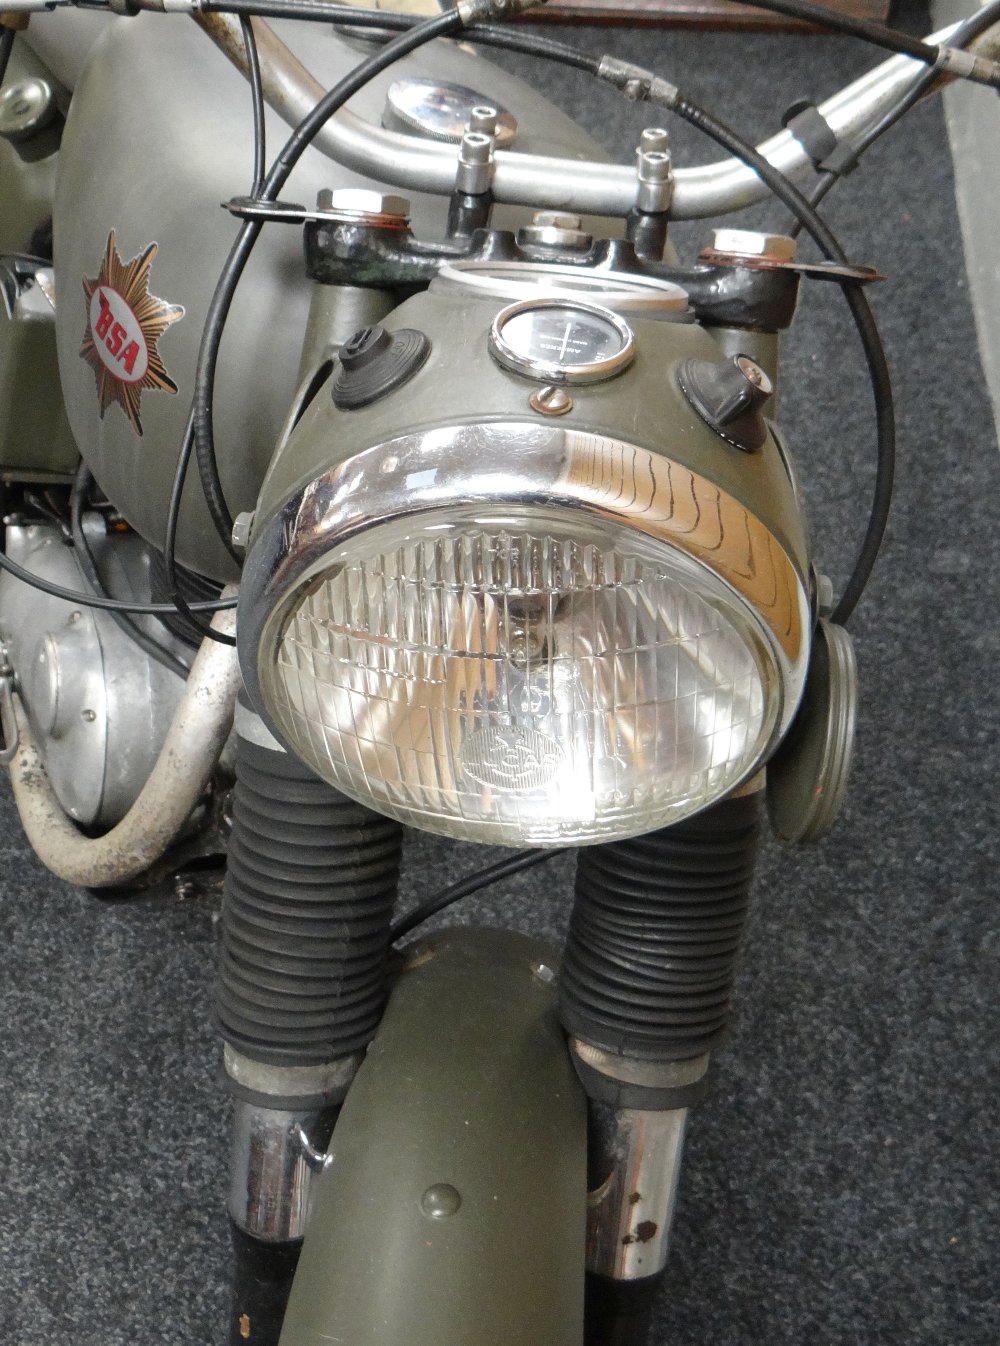 A VINTAGE BSA MILITARY ISSUE MOTORCYCLE 350cc, model BSA-B40-WD, dated 1968, MOT to June 2017, - Image 4 of 6